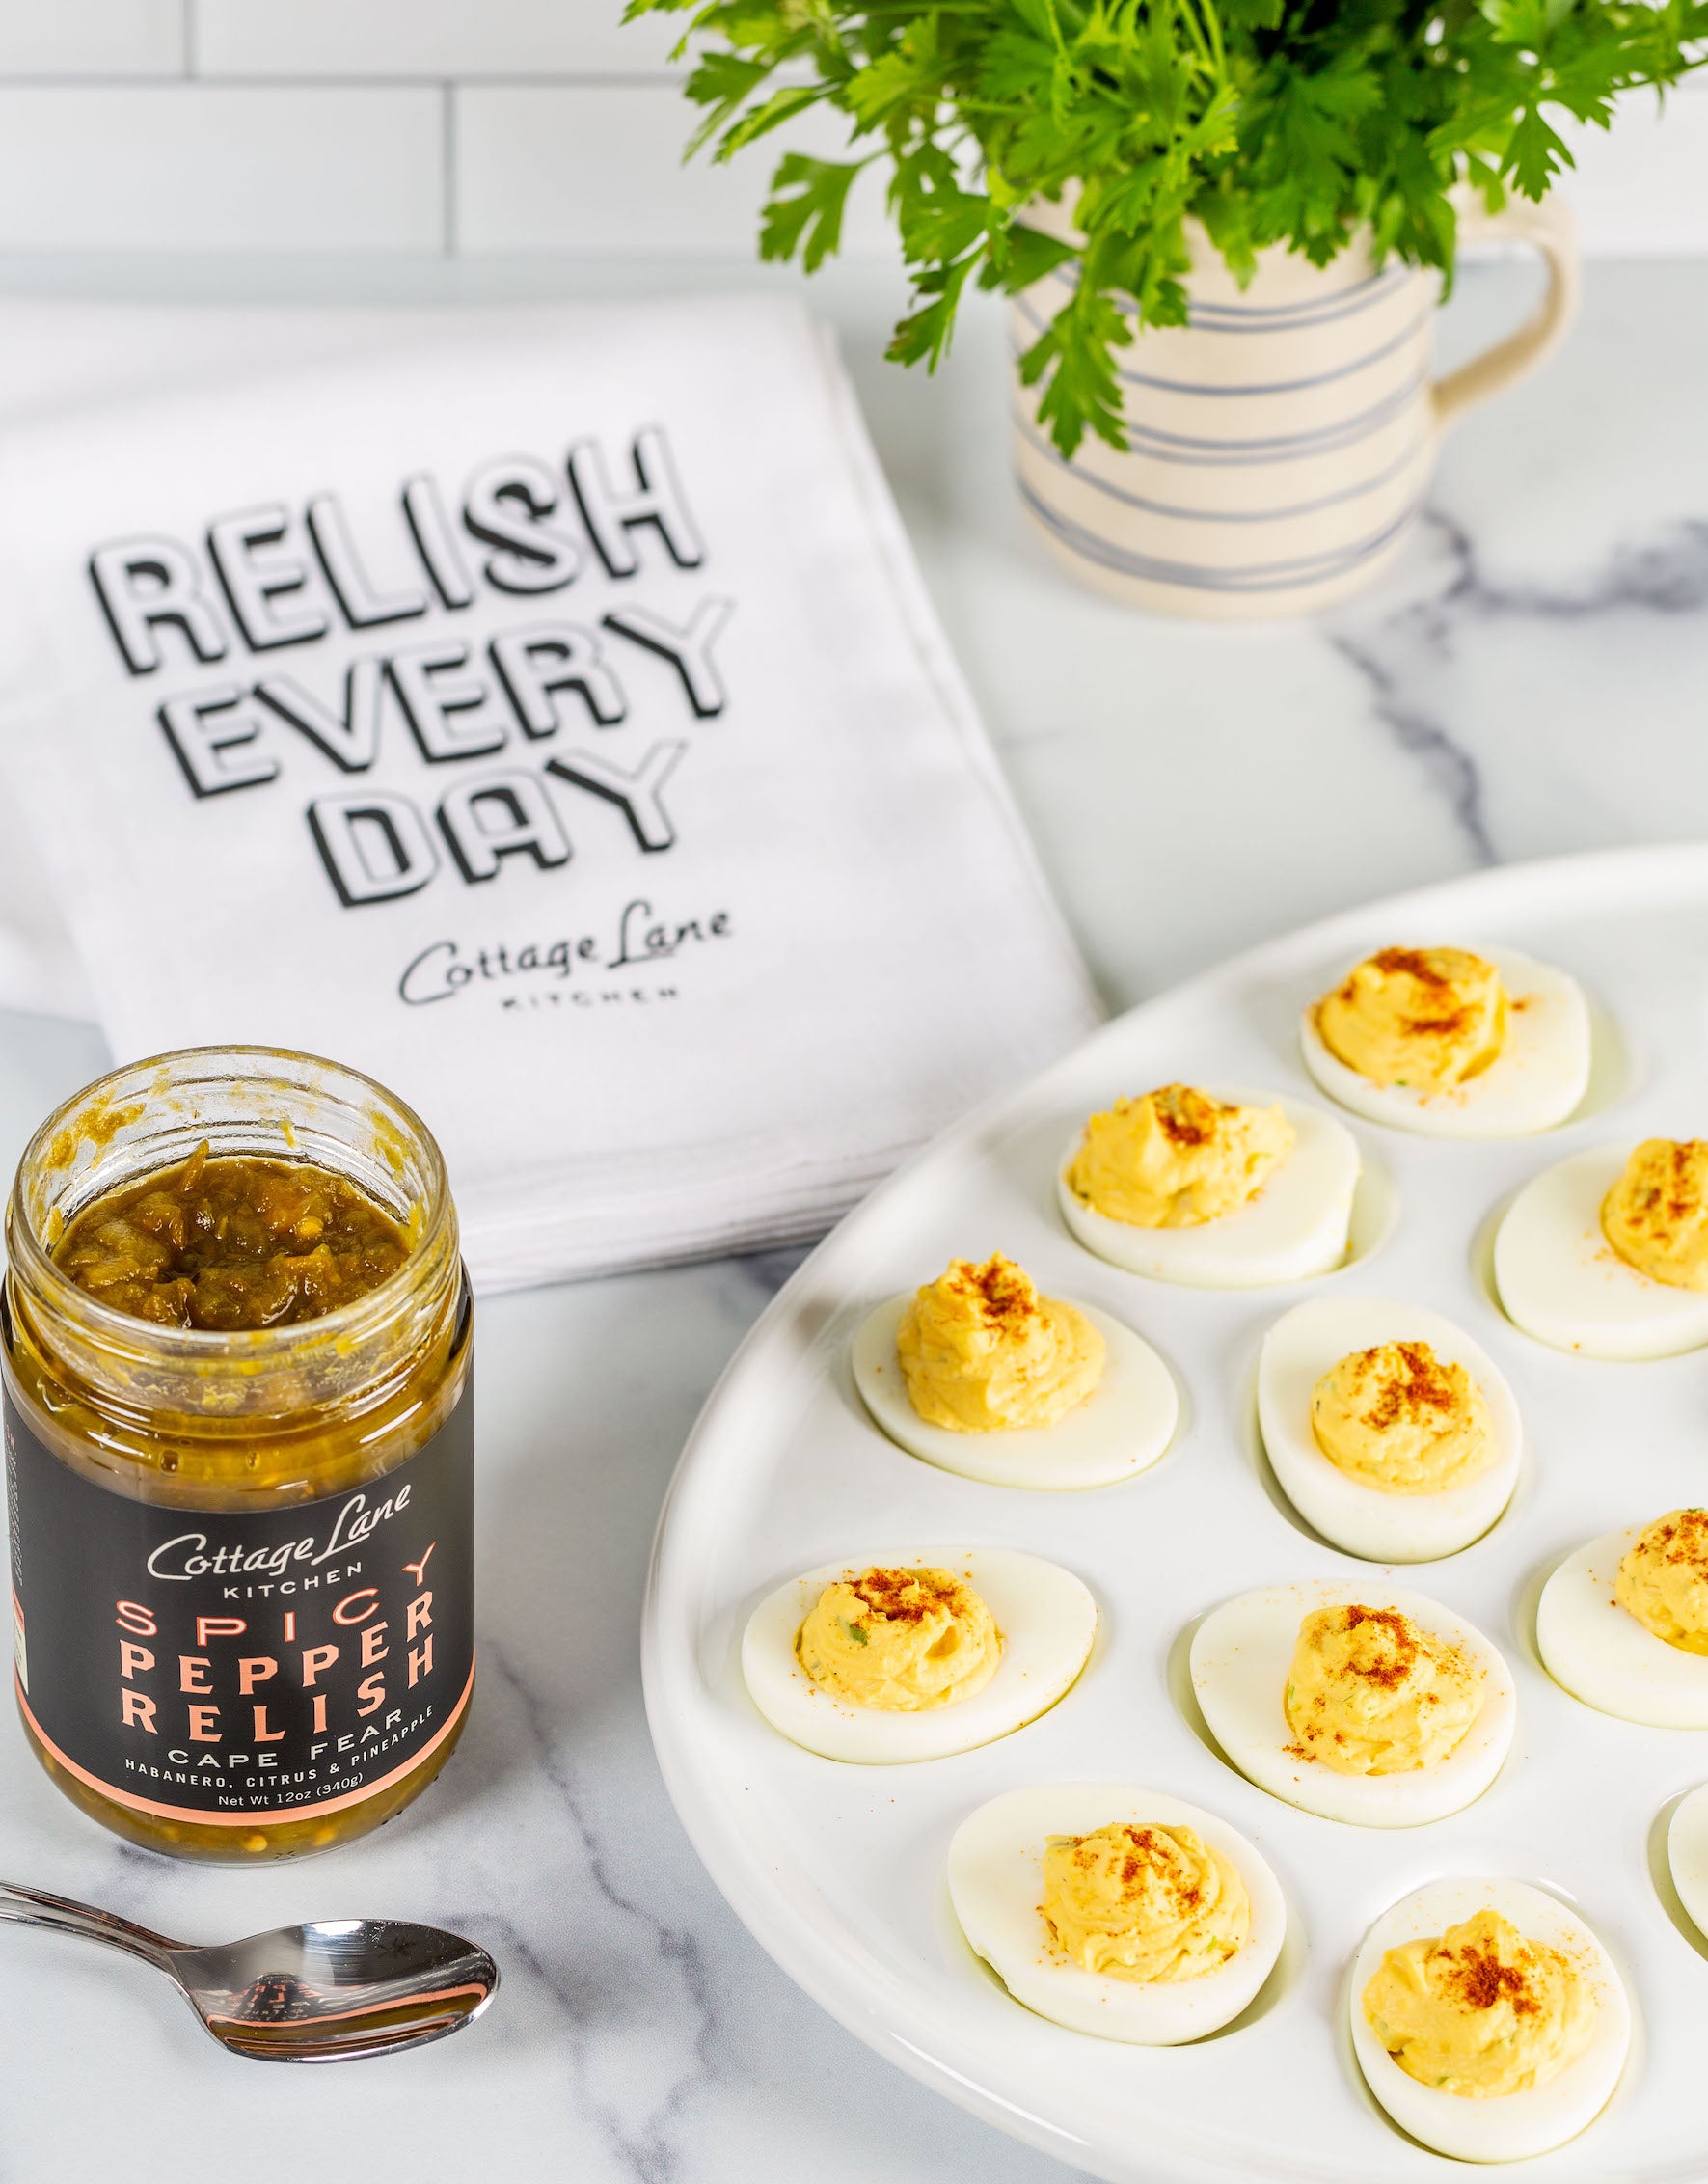 Cape Fear Spicy Pepper Relish on Devilled Eggs with Towel that is printed with Relish every Day Cottage Lane Kitchen on it